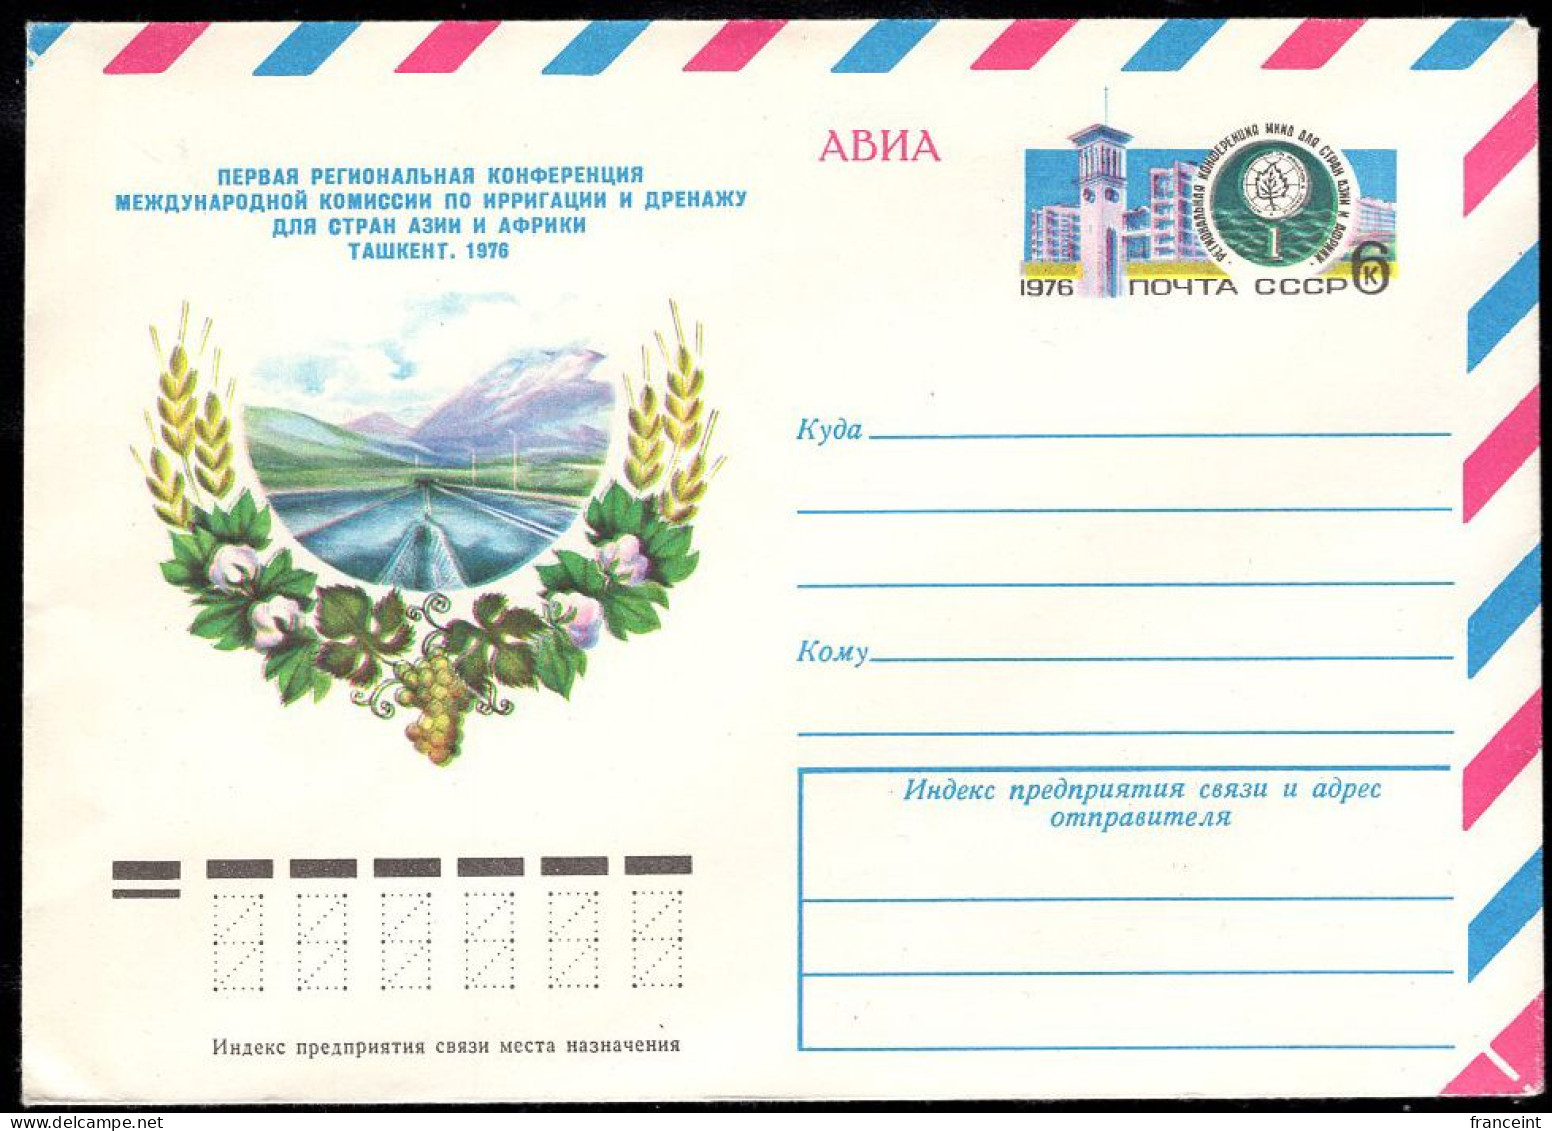 RUSSIA(1976) Irrigation Canals. 6 Kop Illustrated Entire. 1st Regional Conference On Irrigation And Drainage. - 1970-79